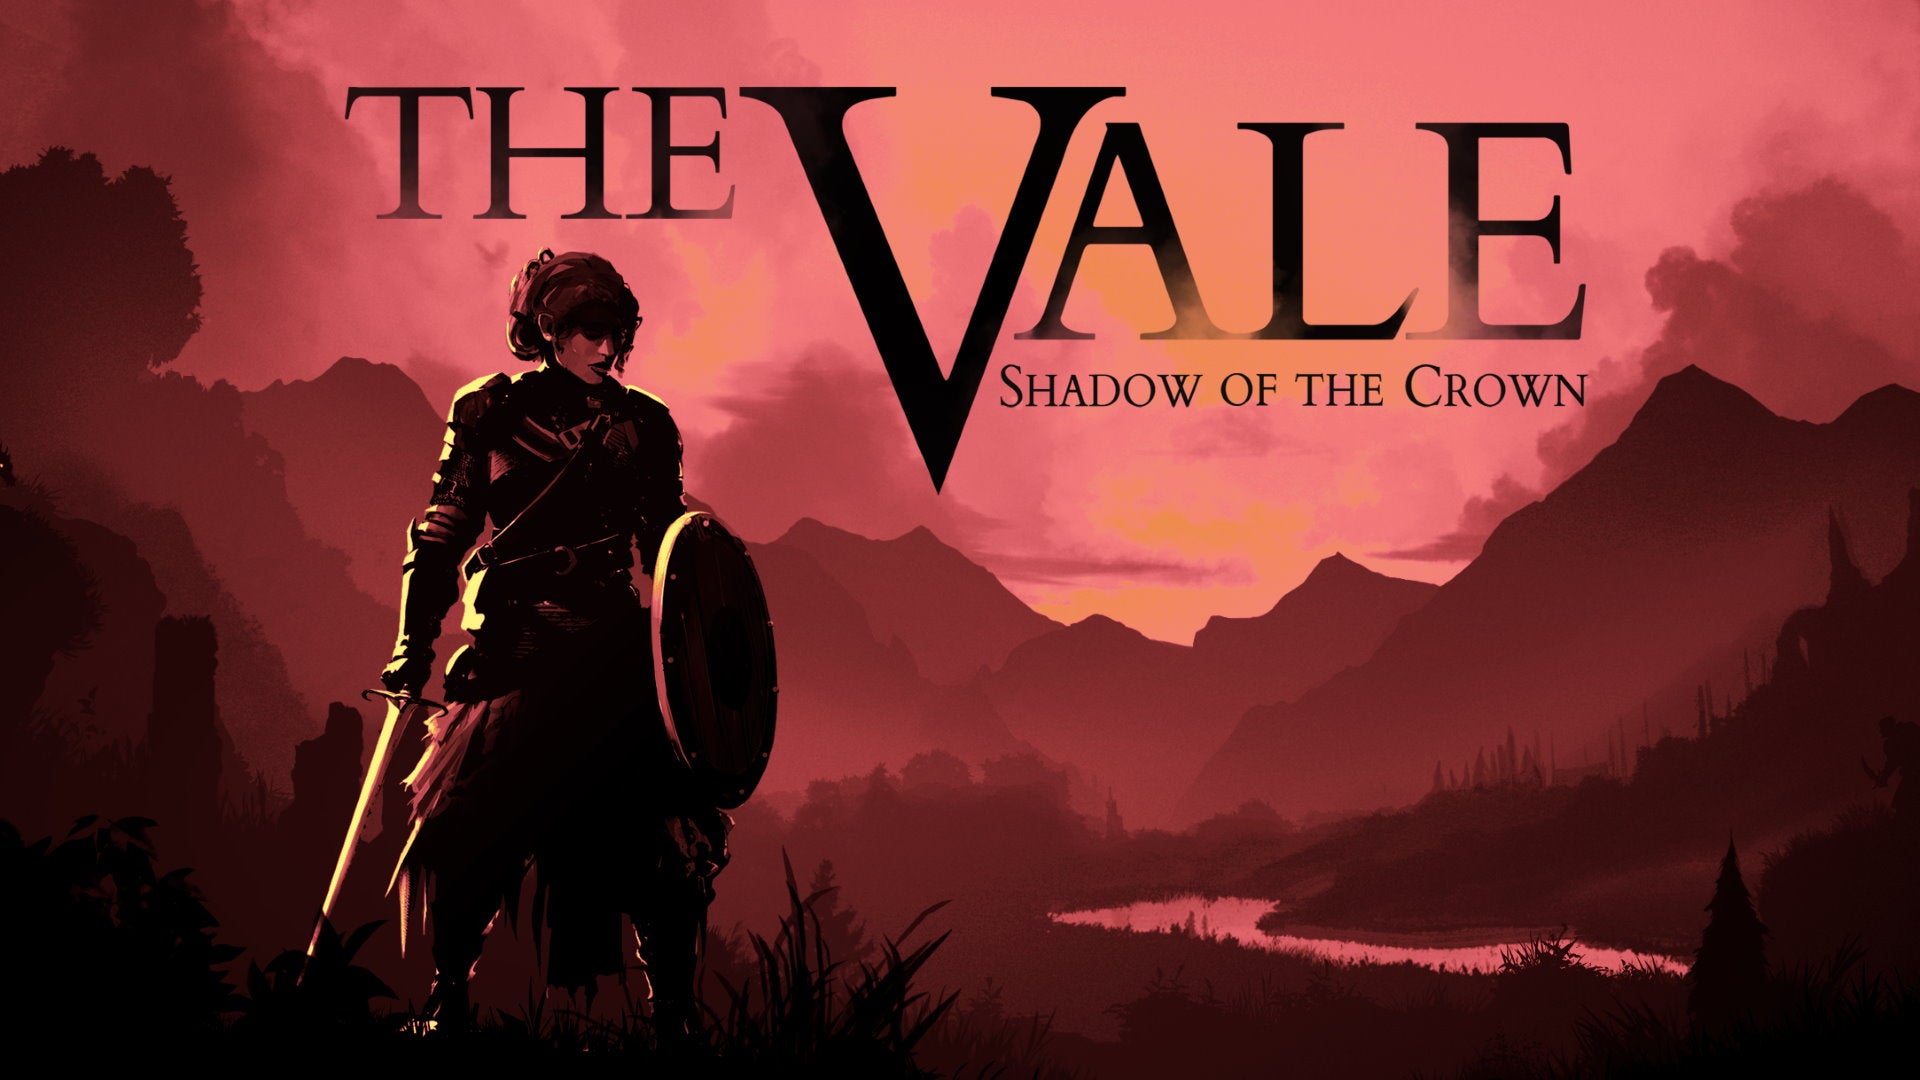 Artwork for The Vale: Shadow Of The Crown, showing a female warrior shrouded in darkness against a red, mountainous landscape